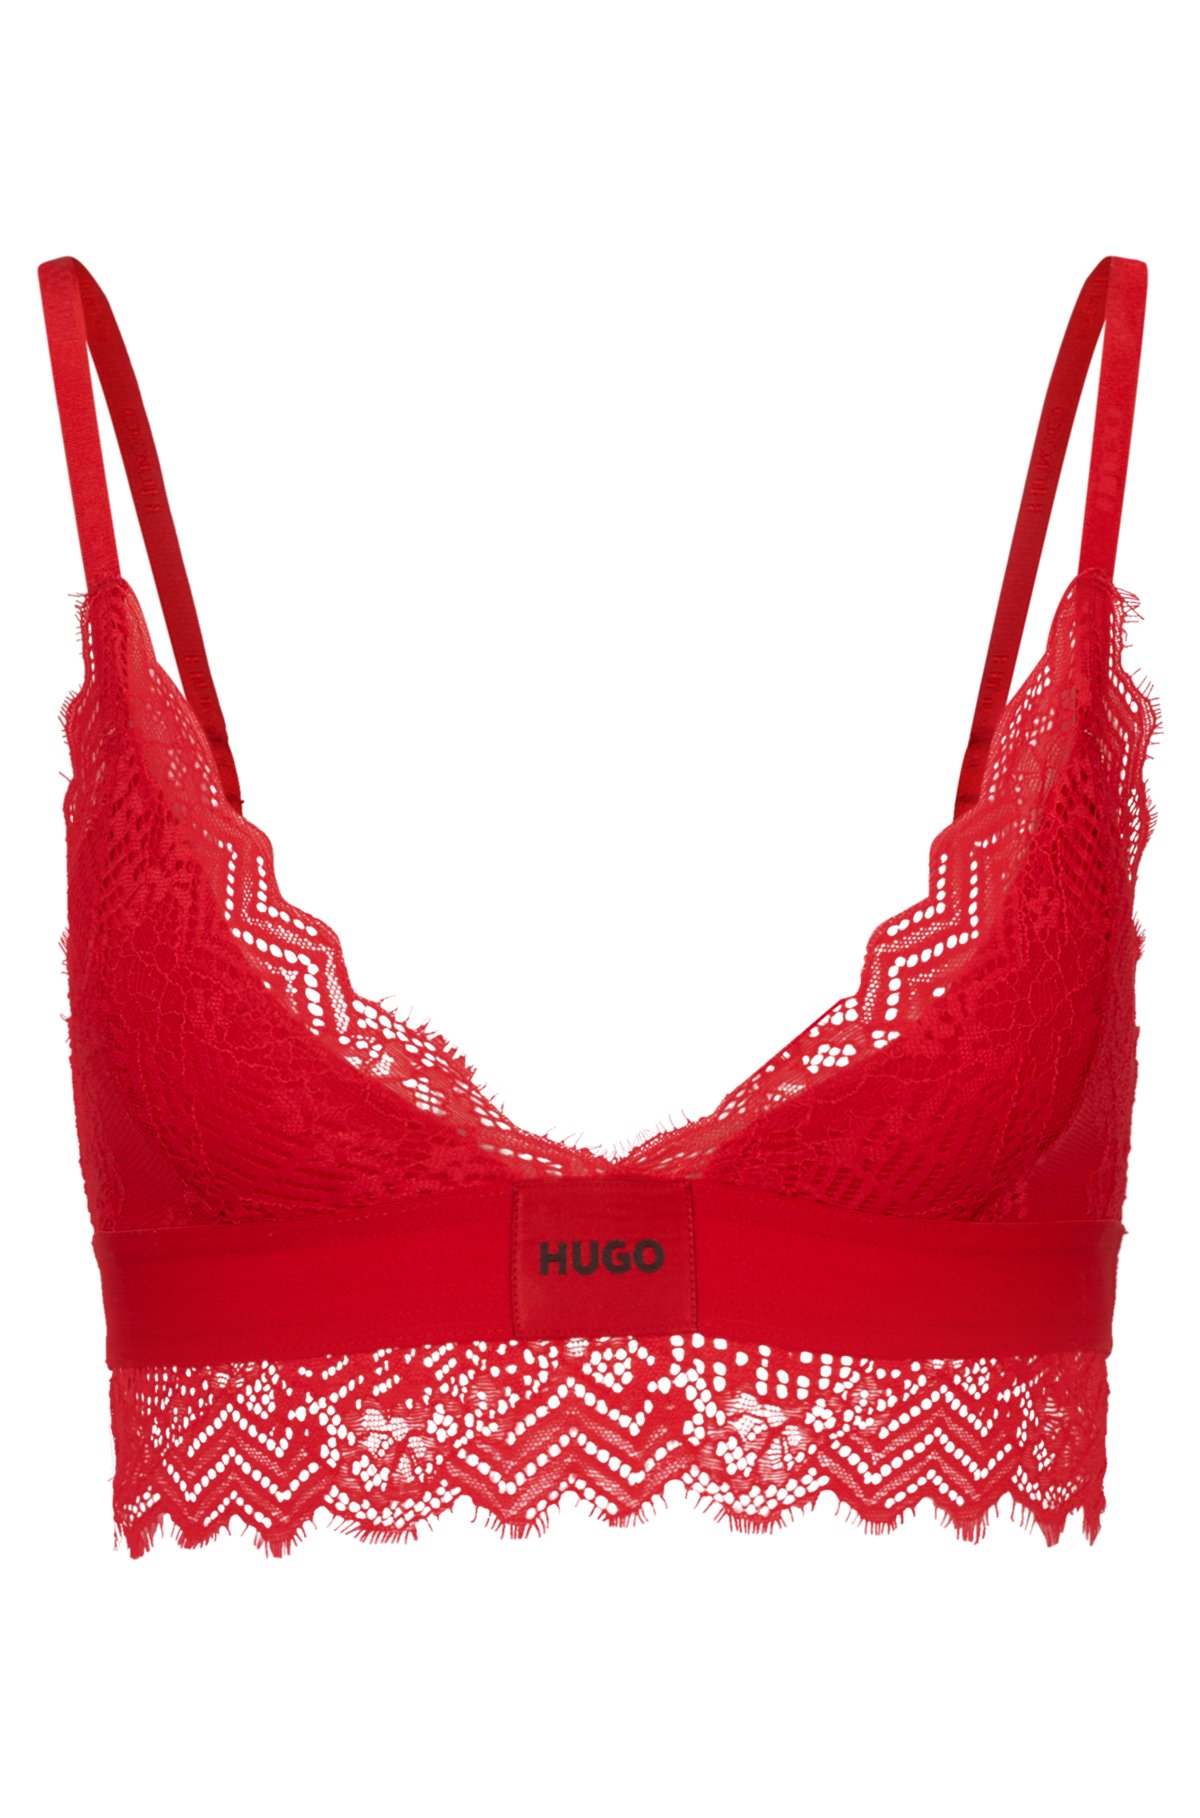 HUGO - Padded triangle bra in geometric lace with logo label